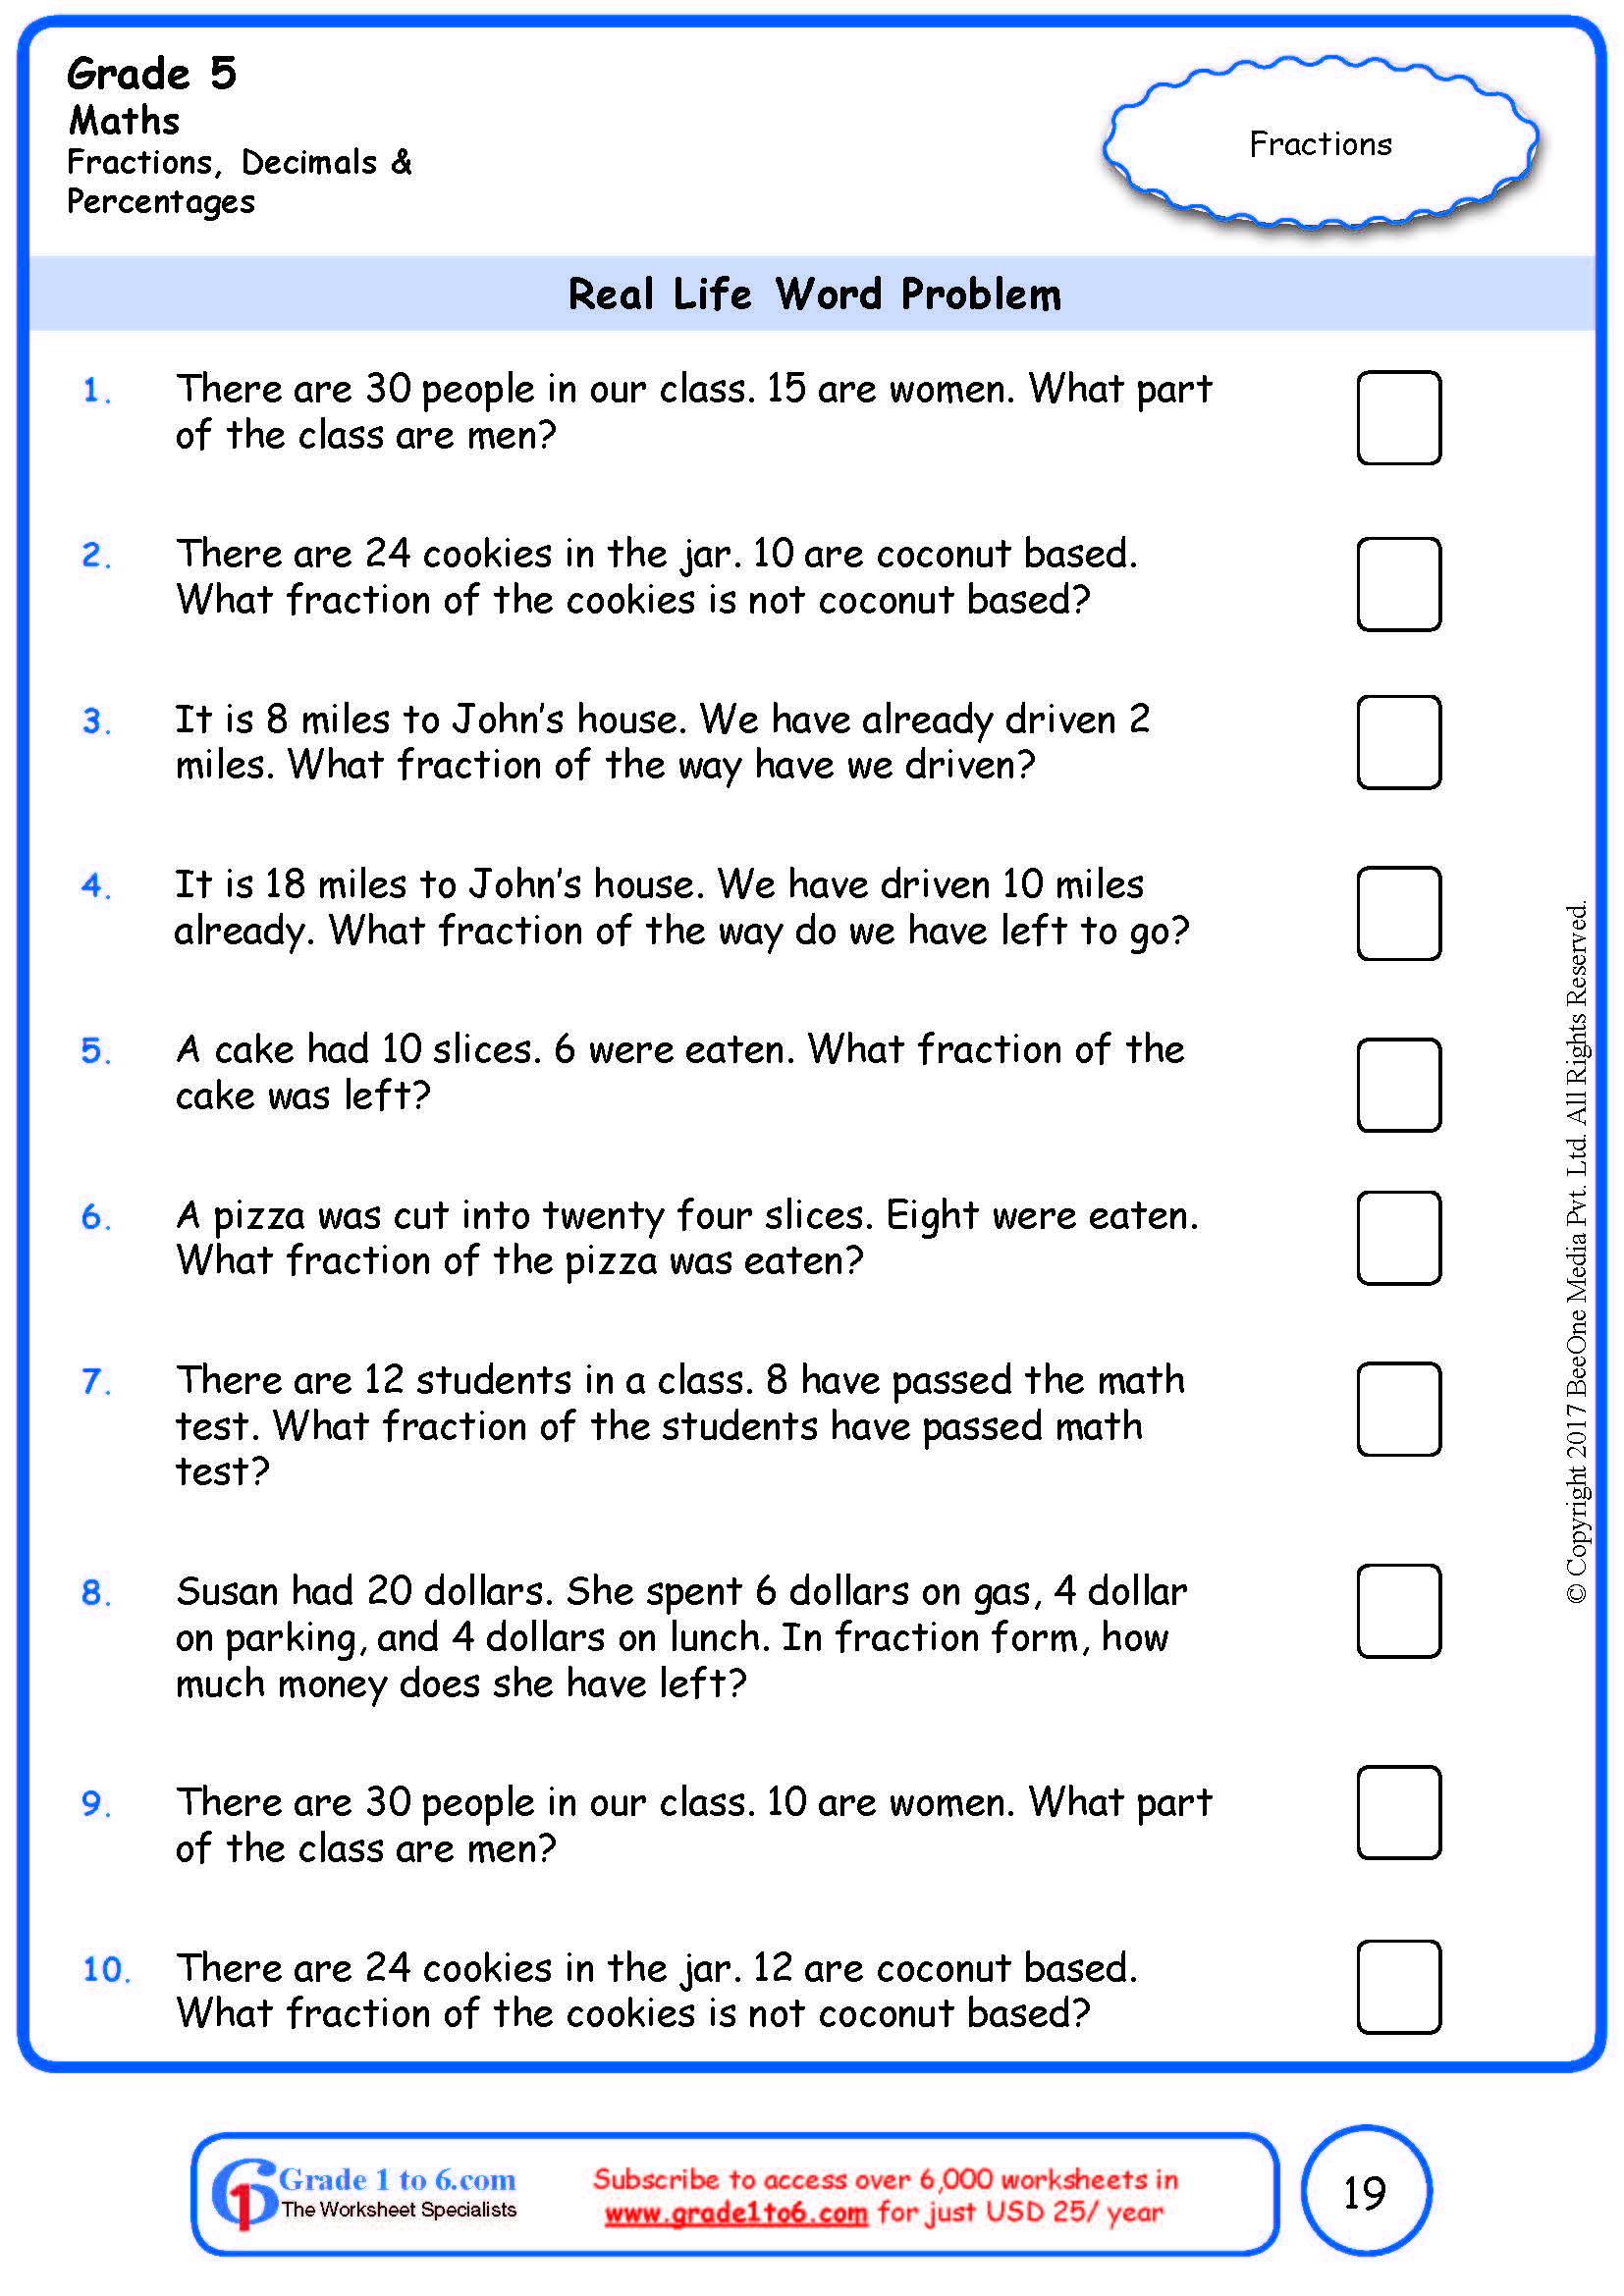 grade 5 word problems in fractions worksheets www grade1to6 com